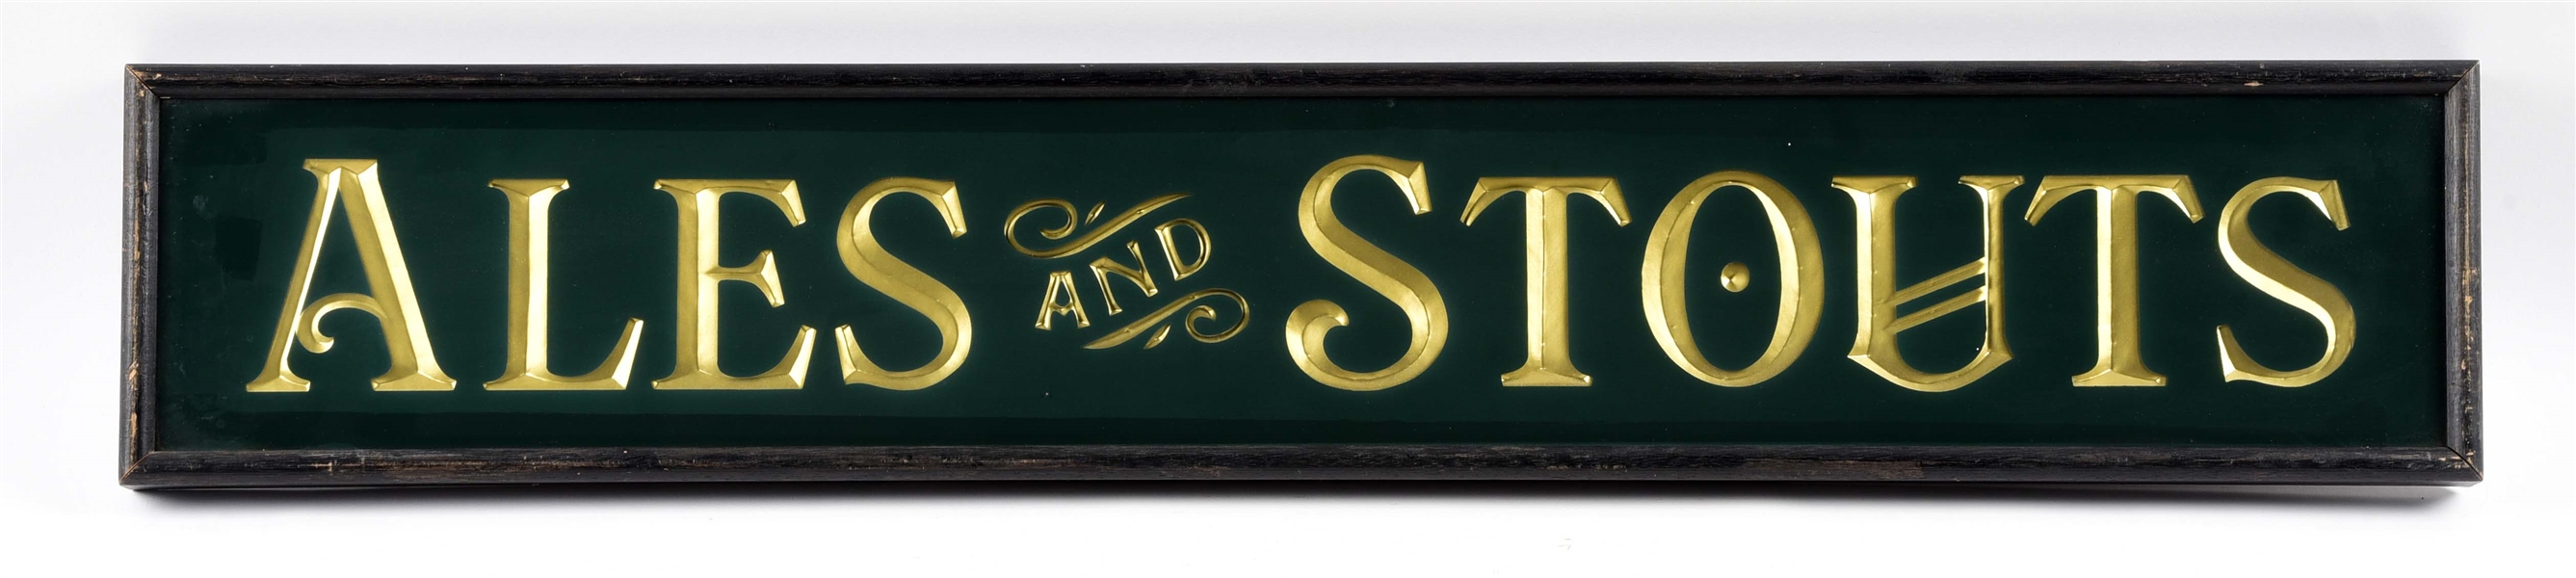 ALES AND STOUTS WOODEN FRAMED SIGN.